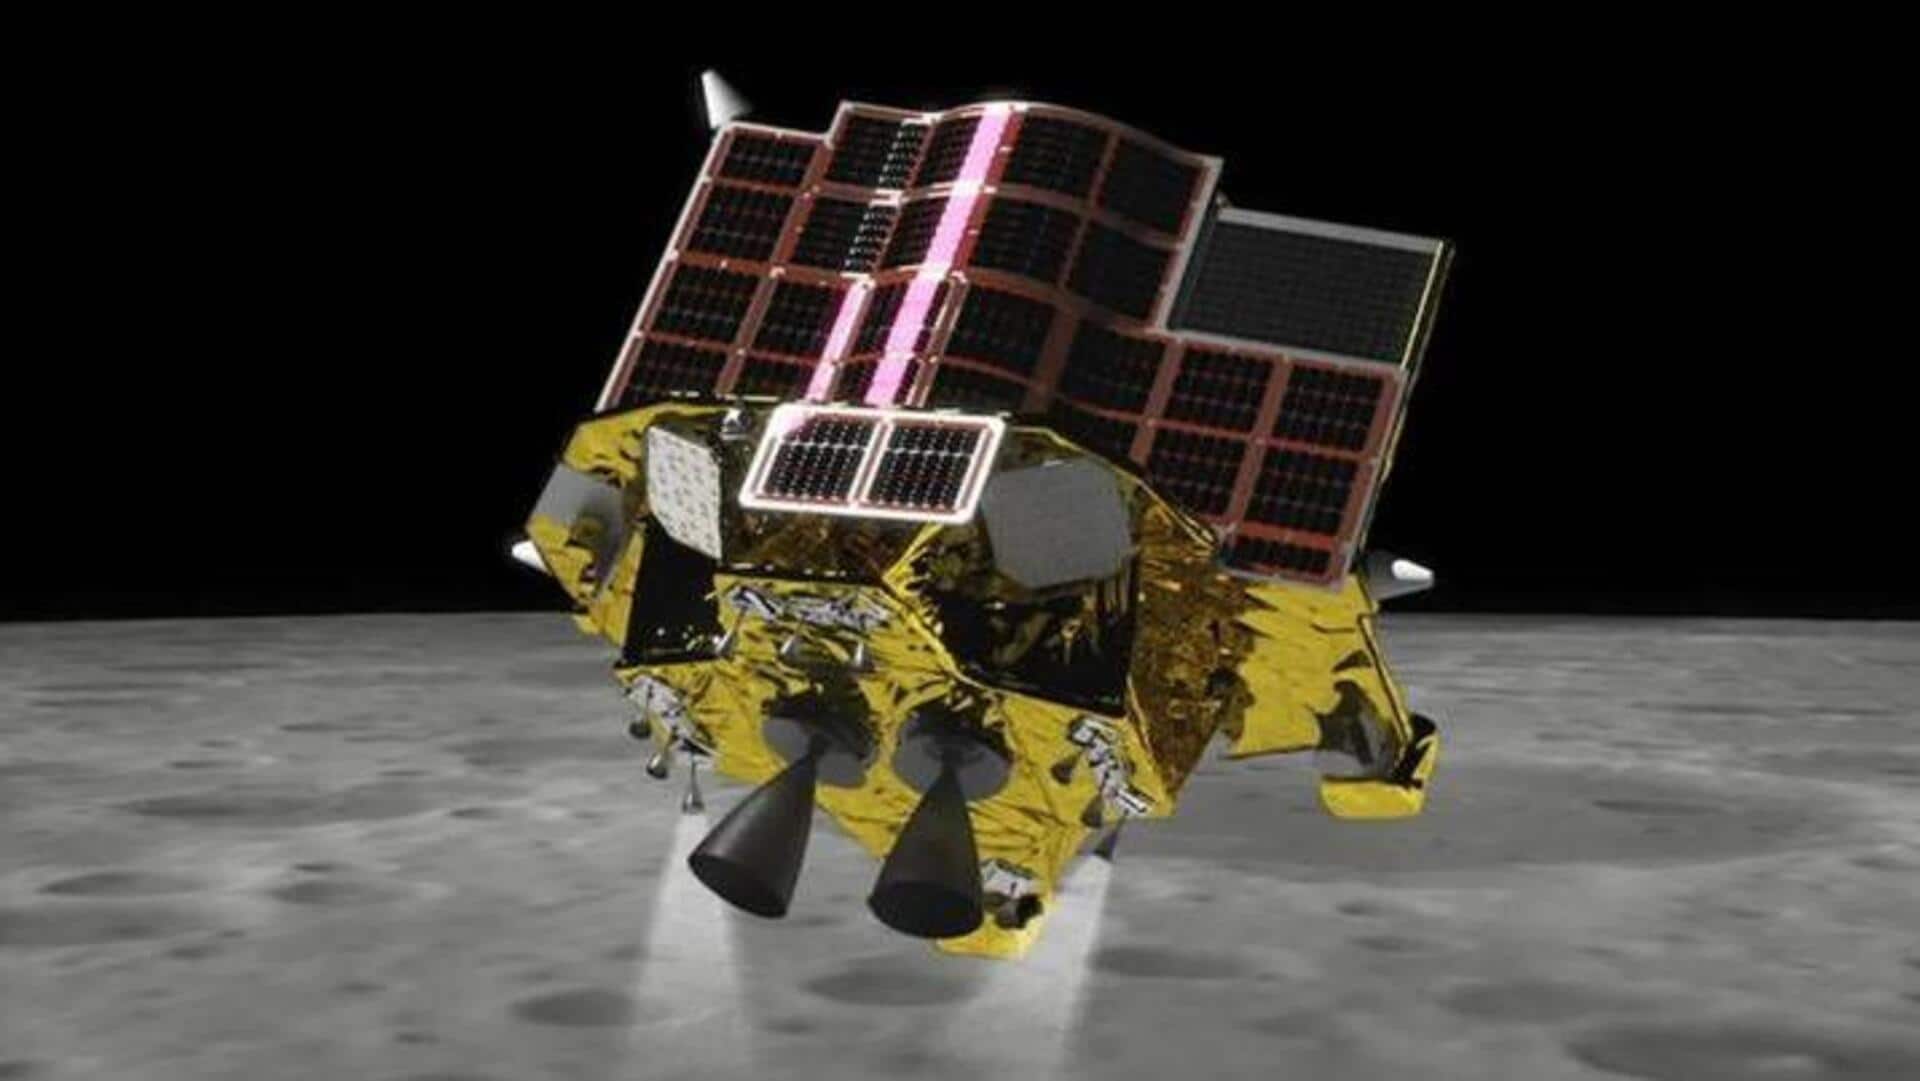 Japan's SLIM probe to attempt historic Moon landing in January